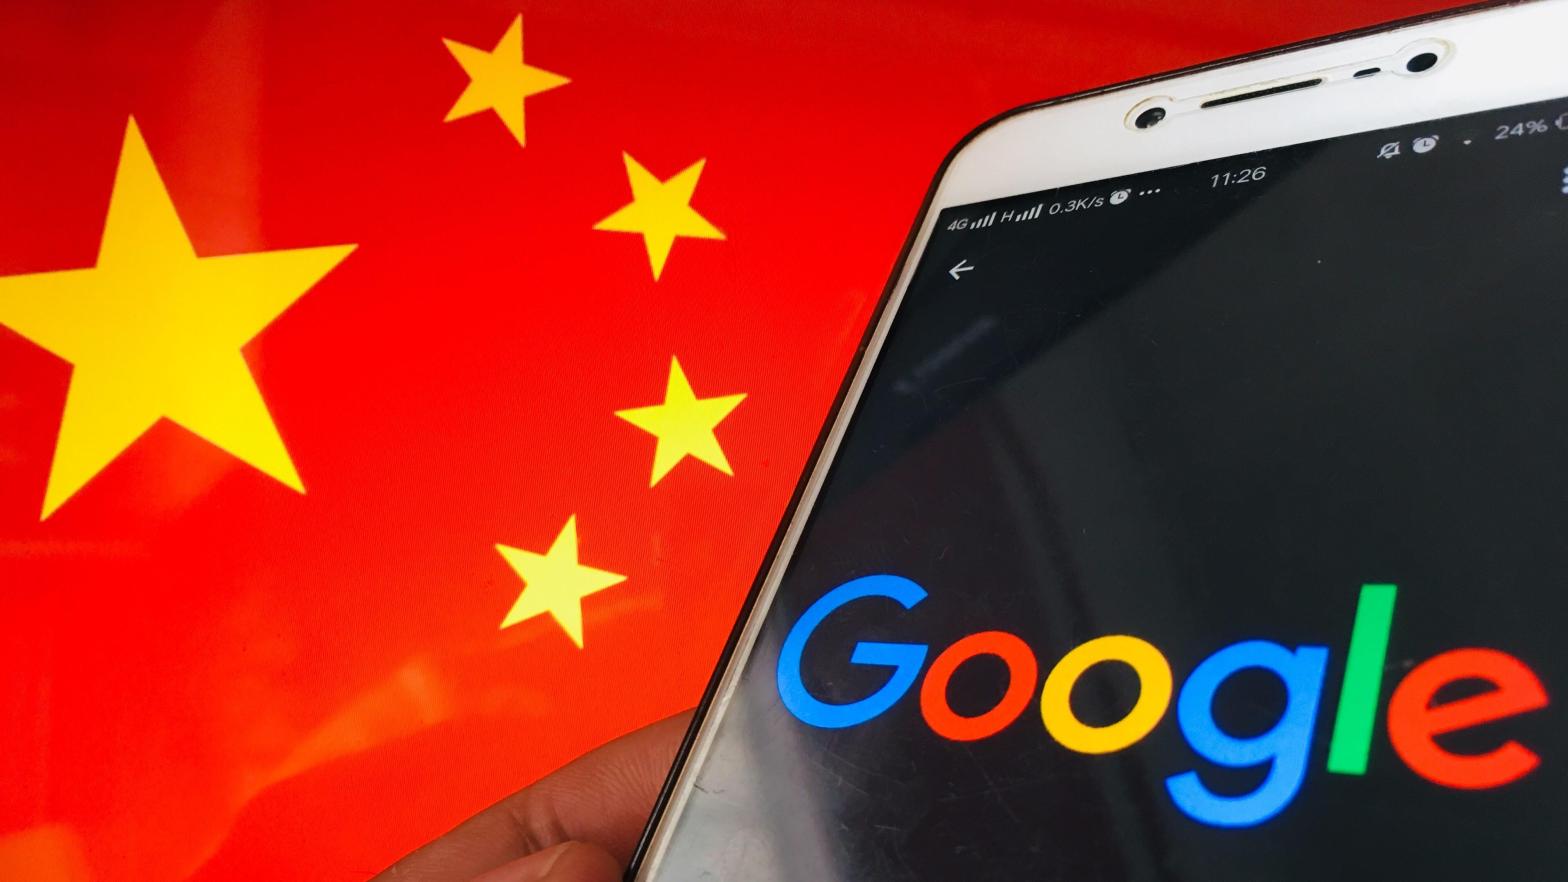 Google has long had a strained business relationship with China, and despite all the effort it's only captured barely 2% of the search market. (Photo: fn.artworks, Shutterstock)